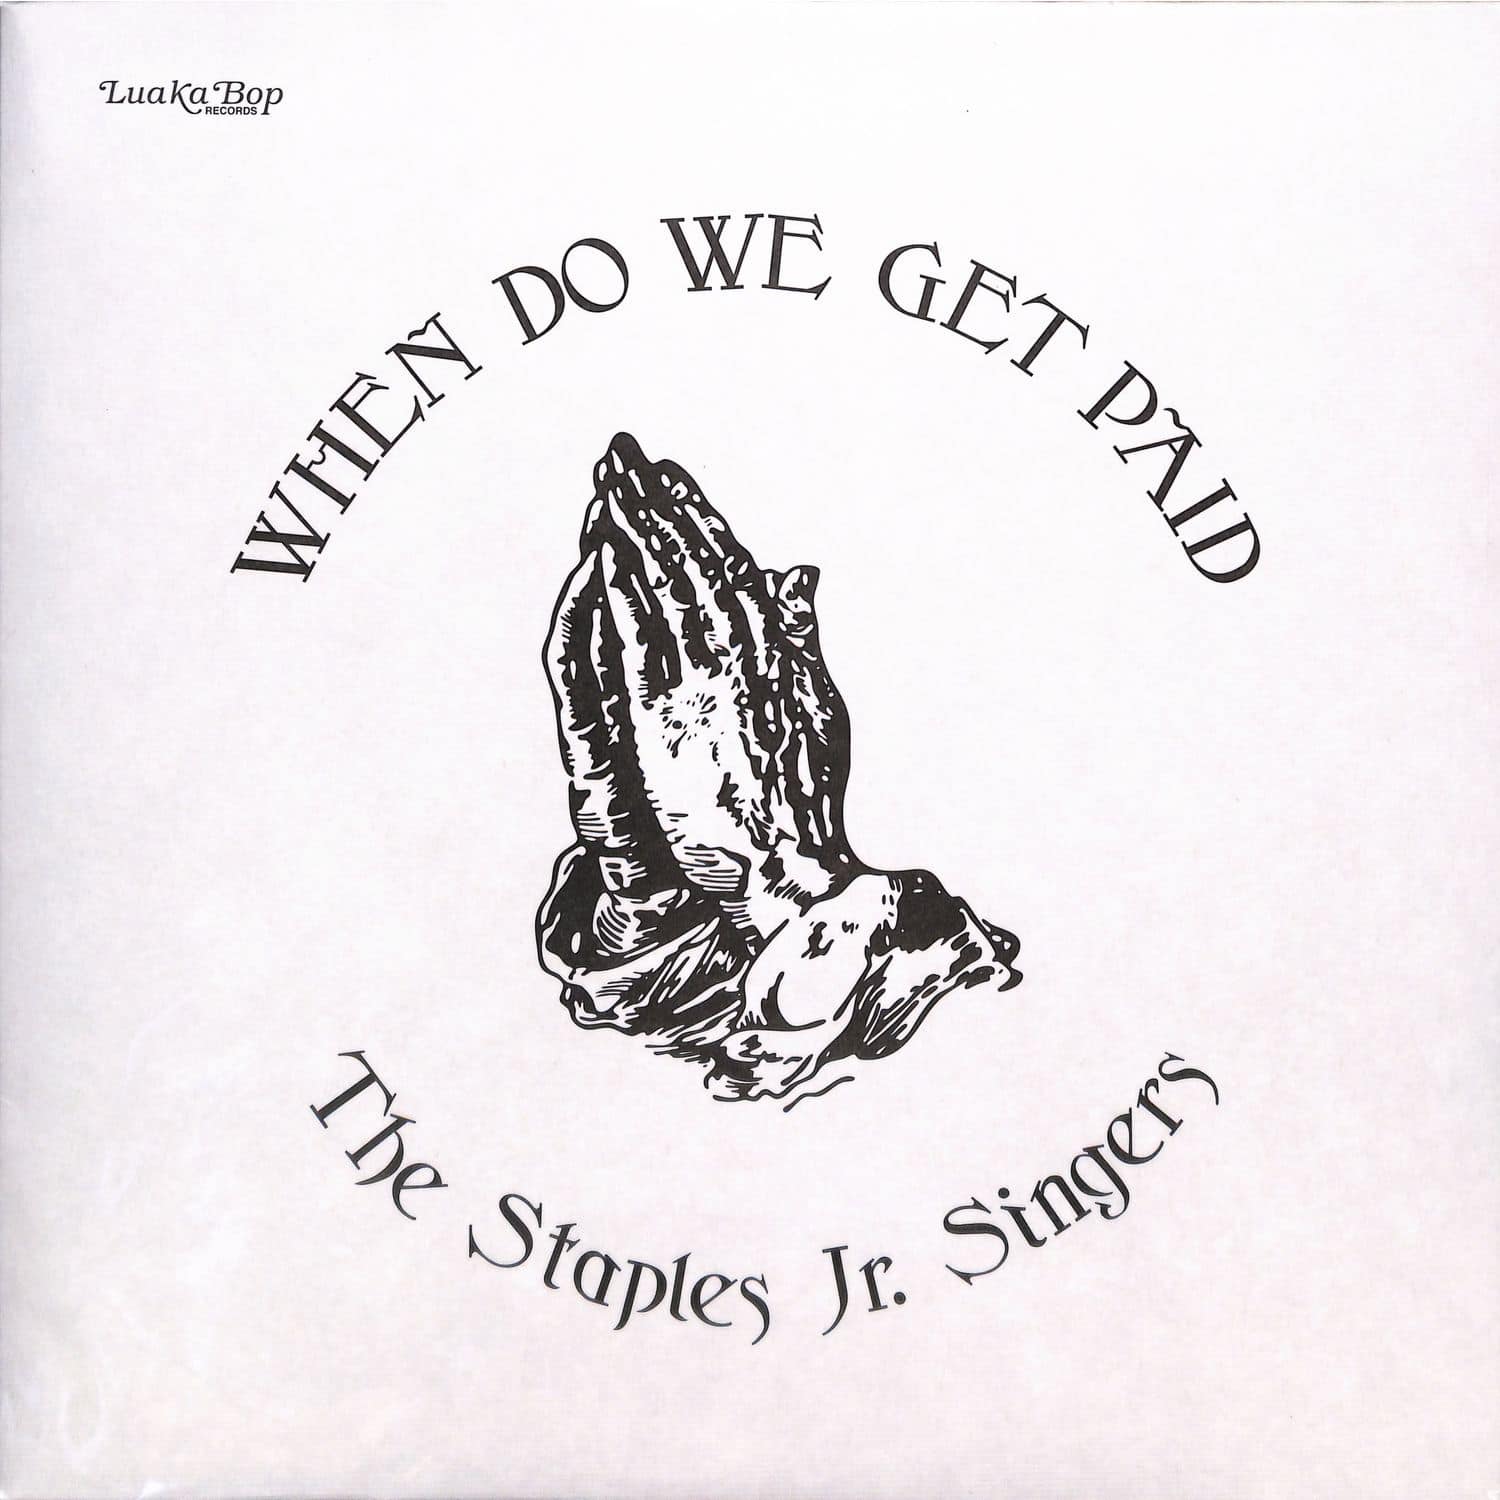 The Staples Jr. Singers - WHEN DO WE GET PAID 